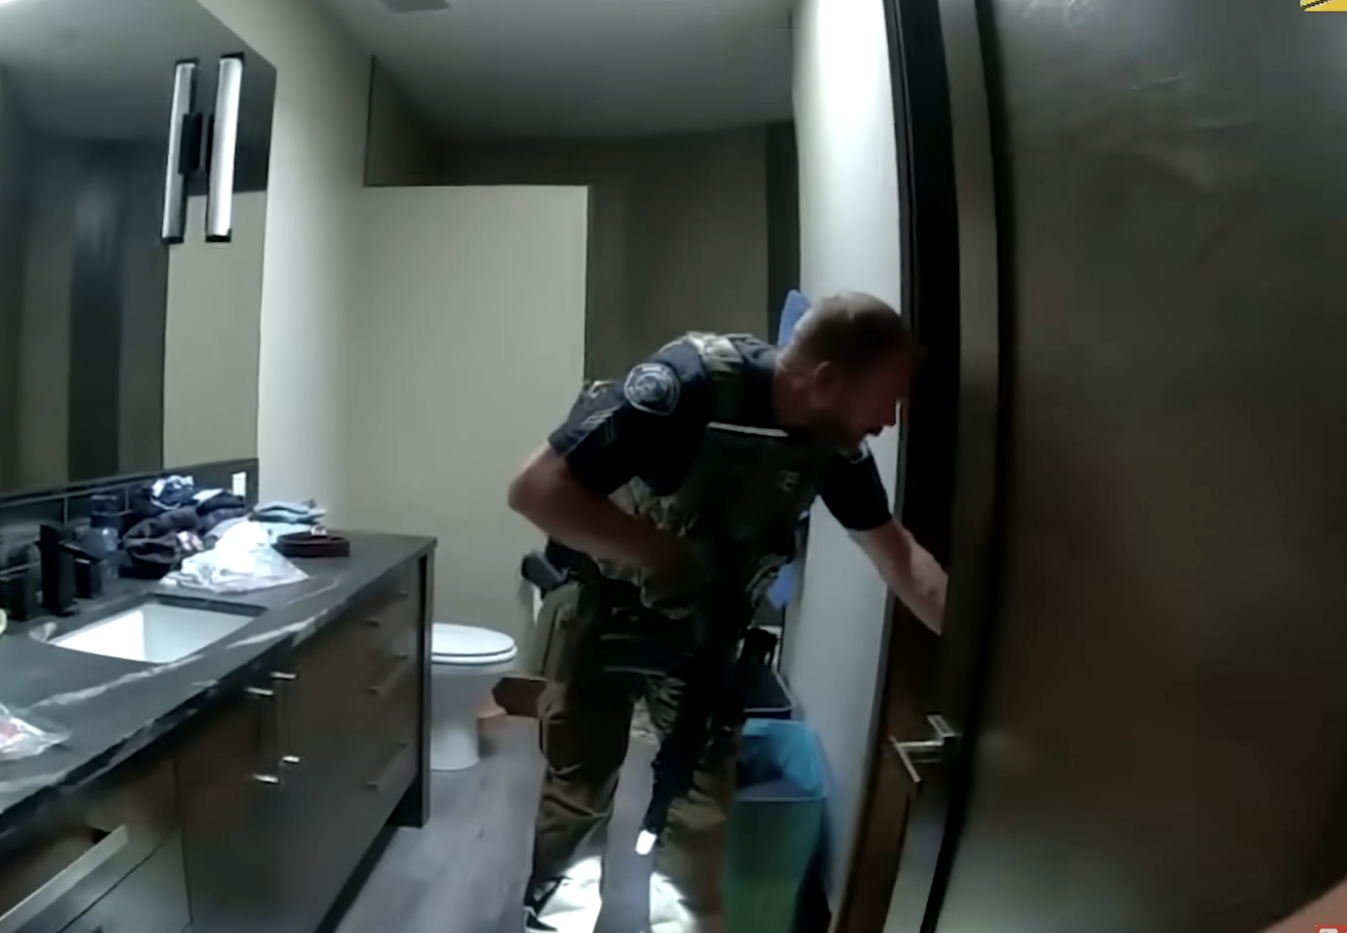 A law enforcement officer searching a bathroom